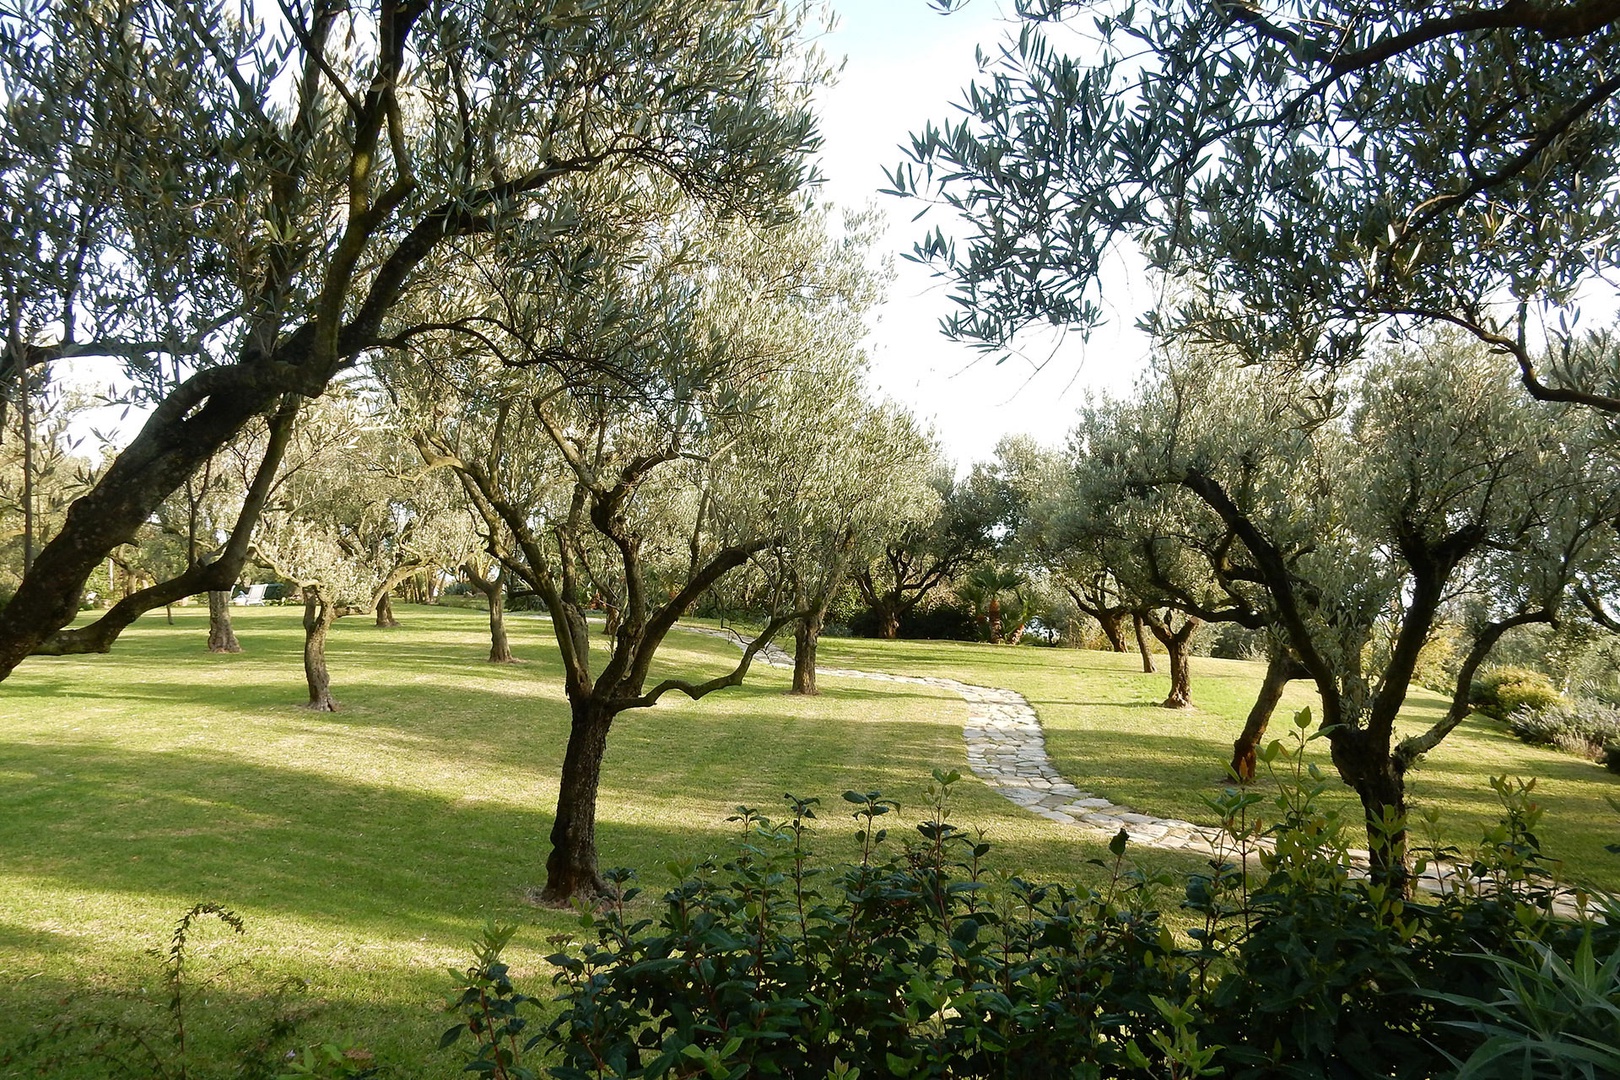 The olive grove on the property is a quiet place to appreciate these ancient trees.